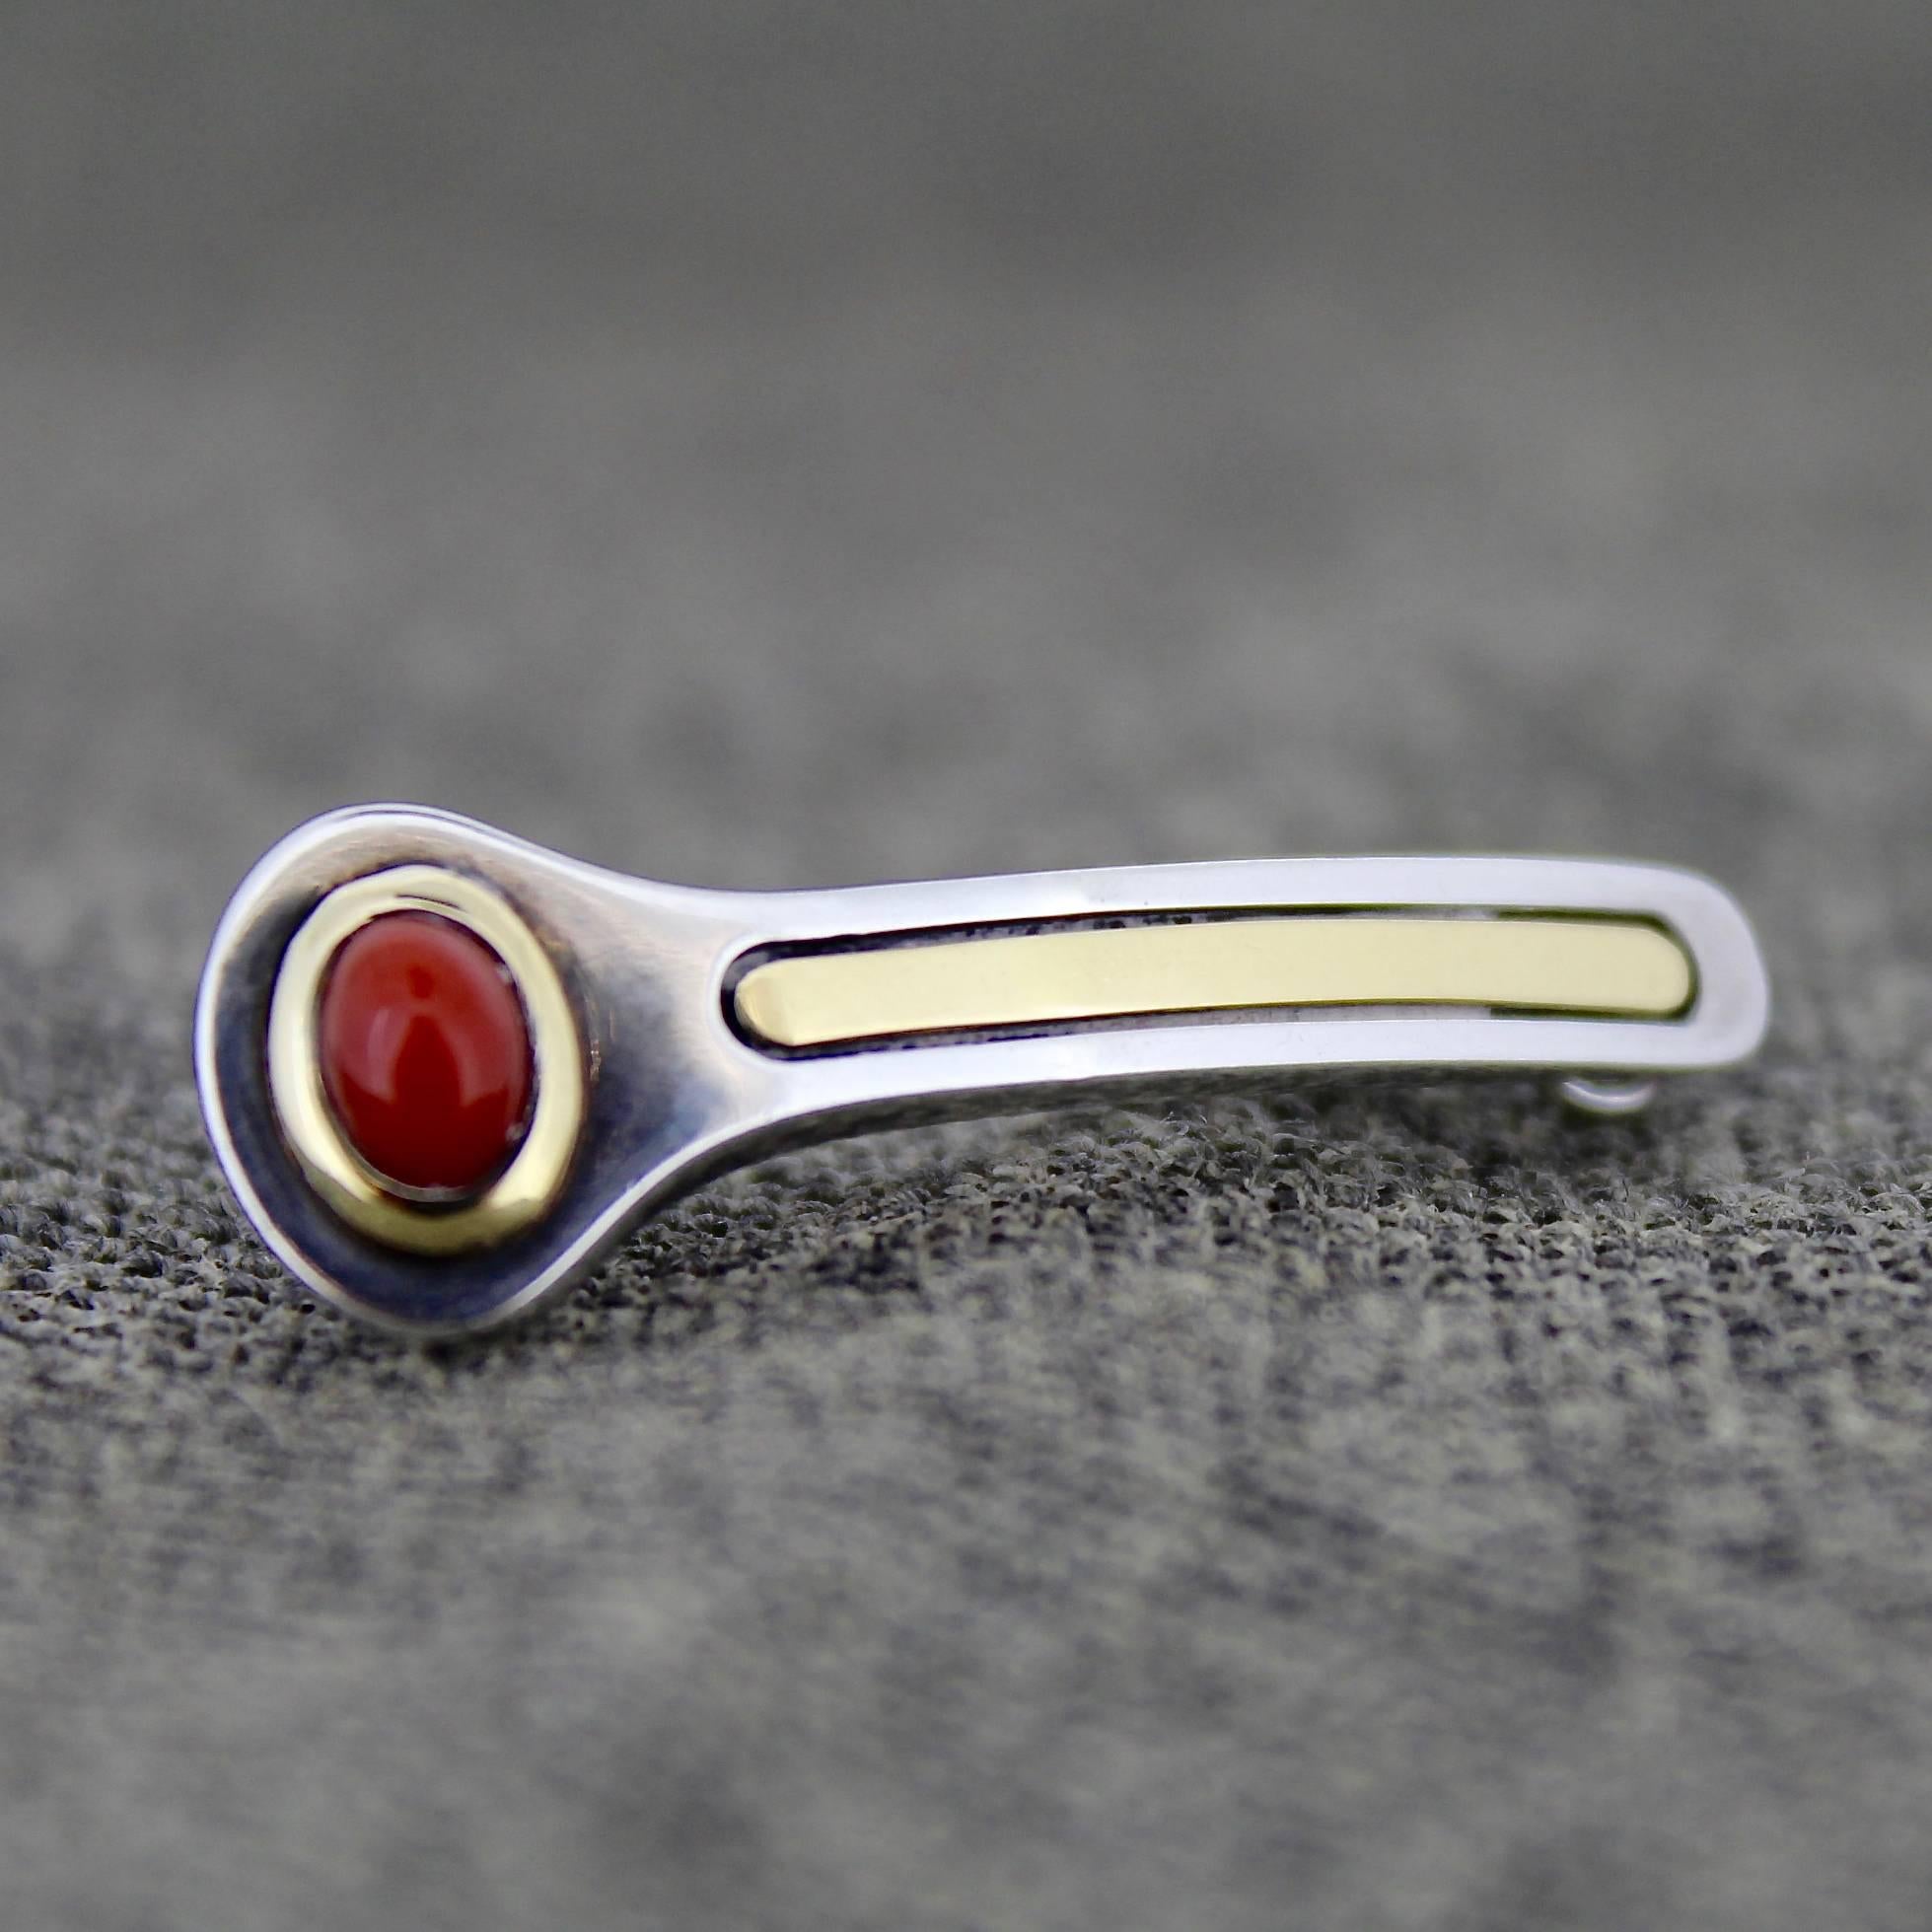 A wonderful, vintage, signed Cartier lapel pin or brooch. This pin simply embodies modern design. Constructed of sterling silver and 18-karat yellow gold, it has red coral cabochon at the end.

 It is marked 